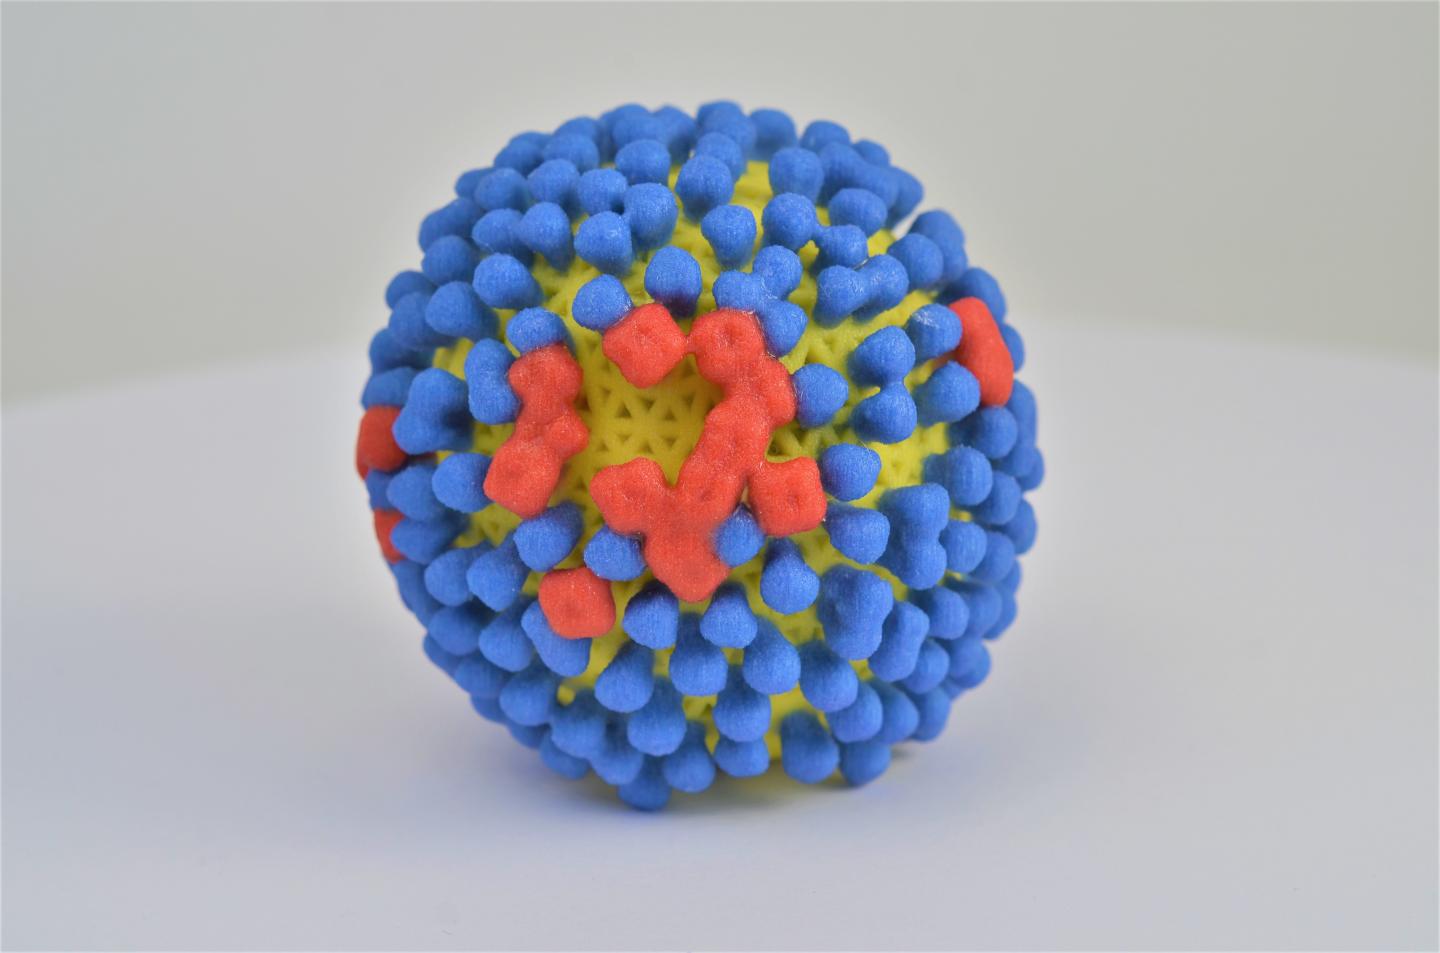 A Picture of a  3-D Printed Influenza Virus